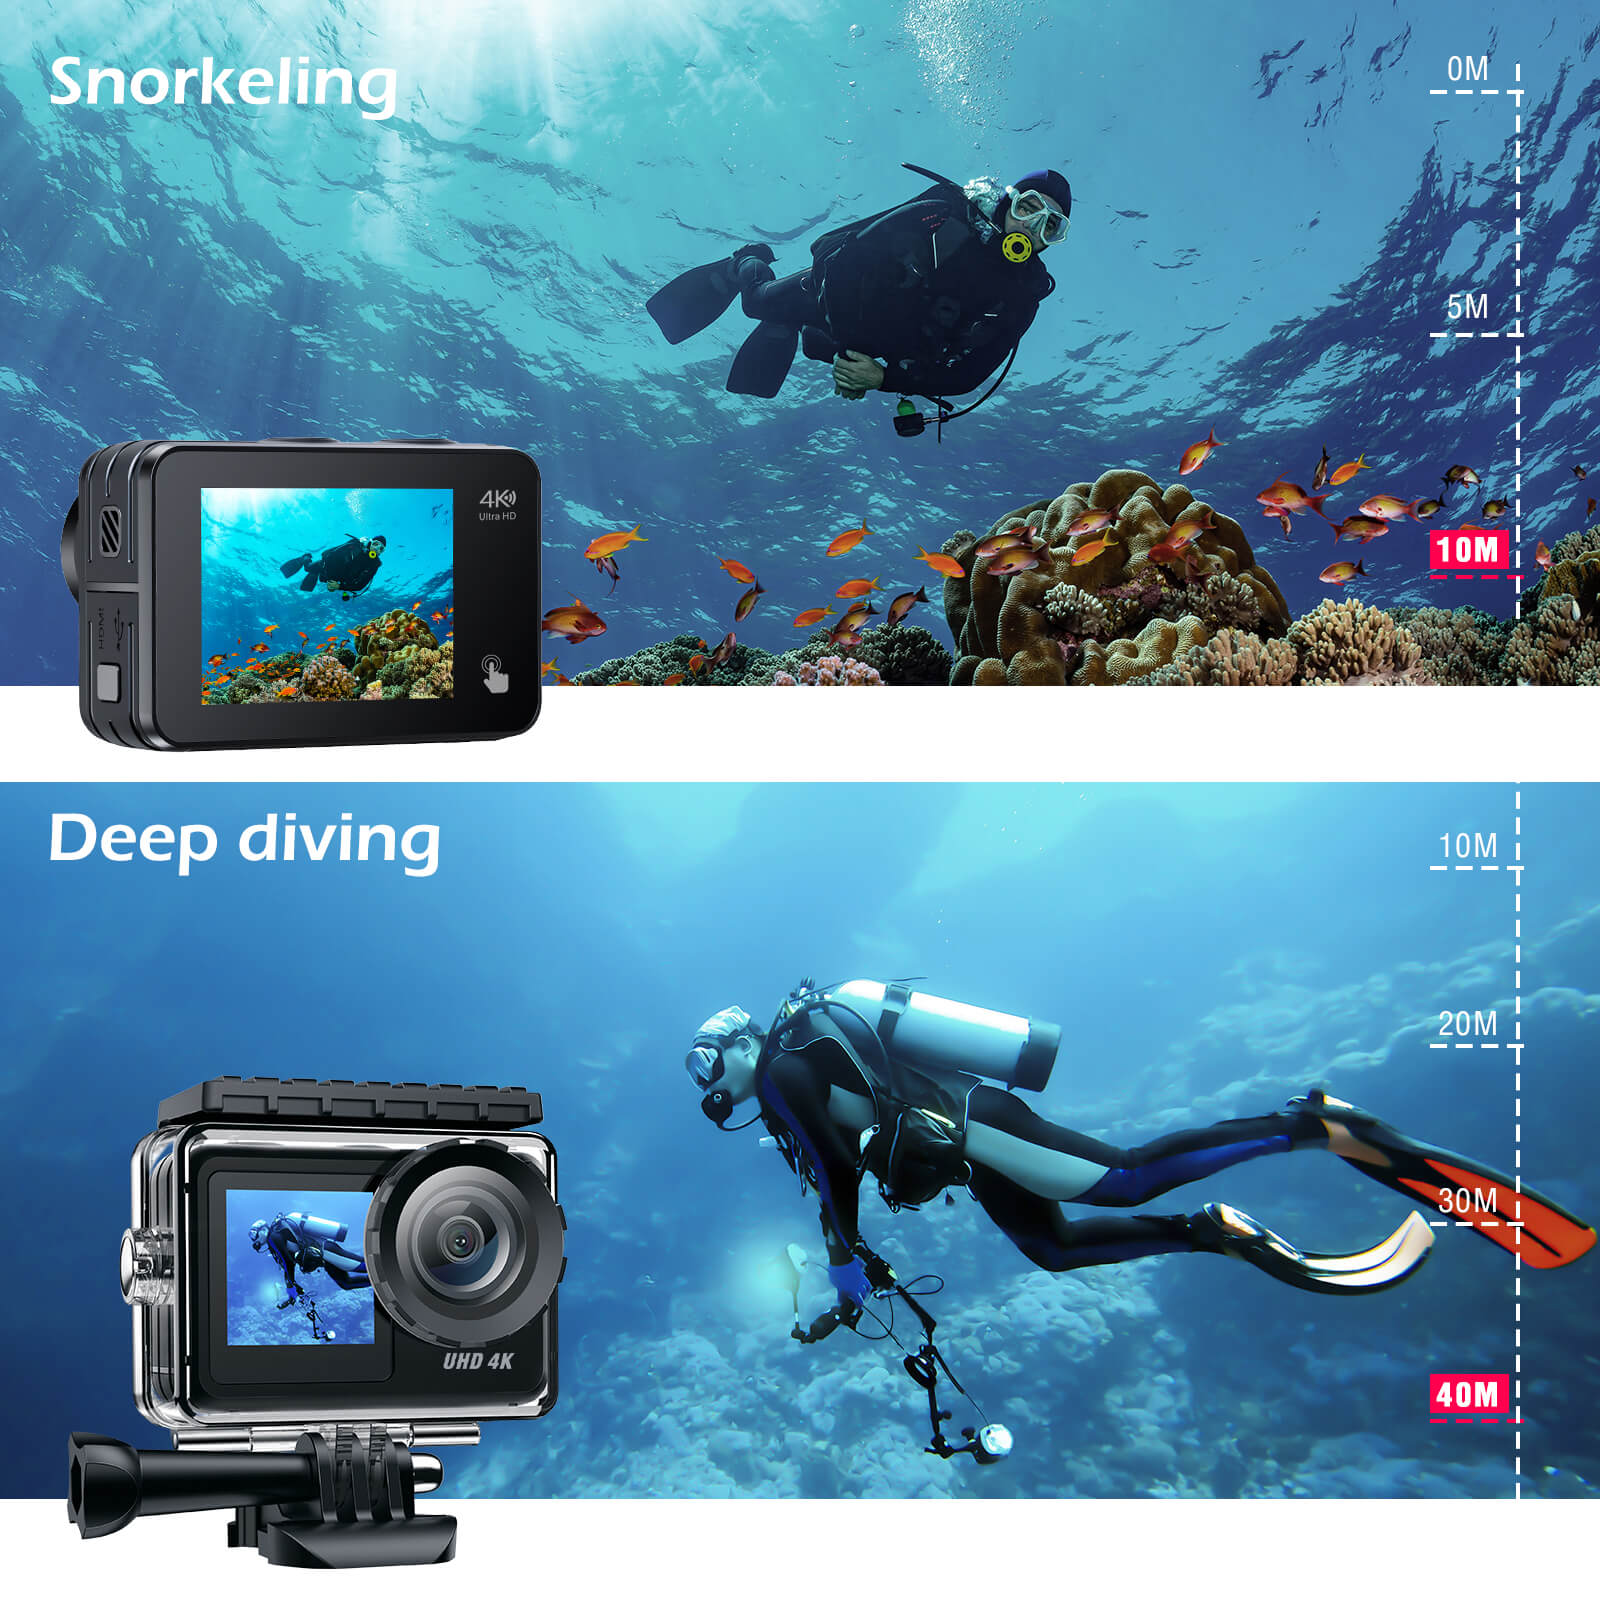 New Waterproof Sports Action Camera Action Cam Camera UHD 4K WiFi